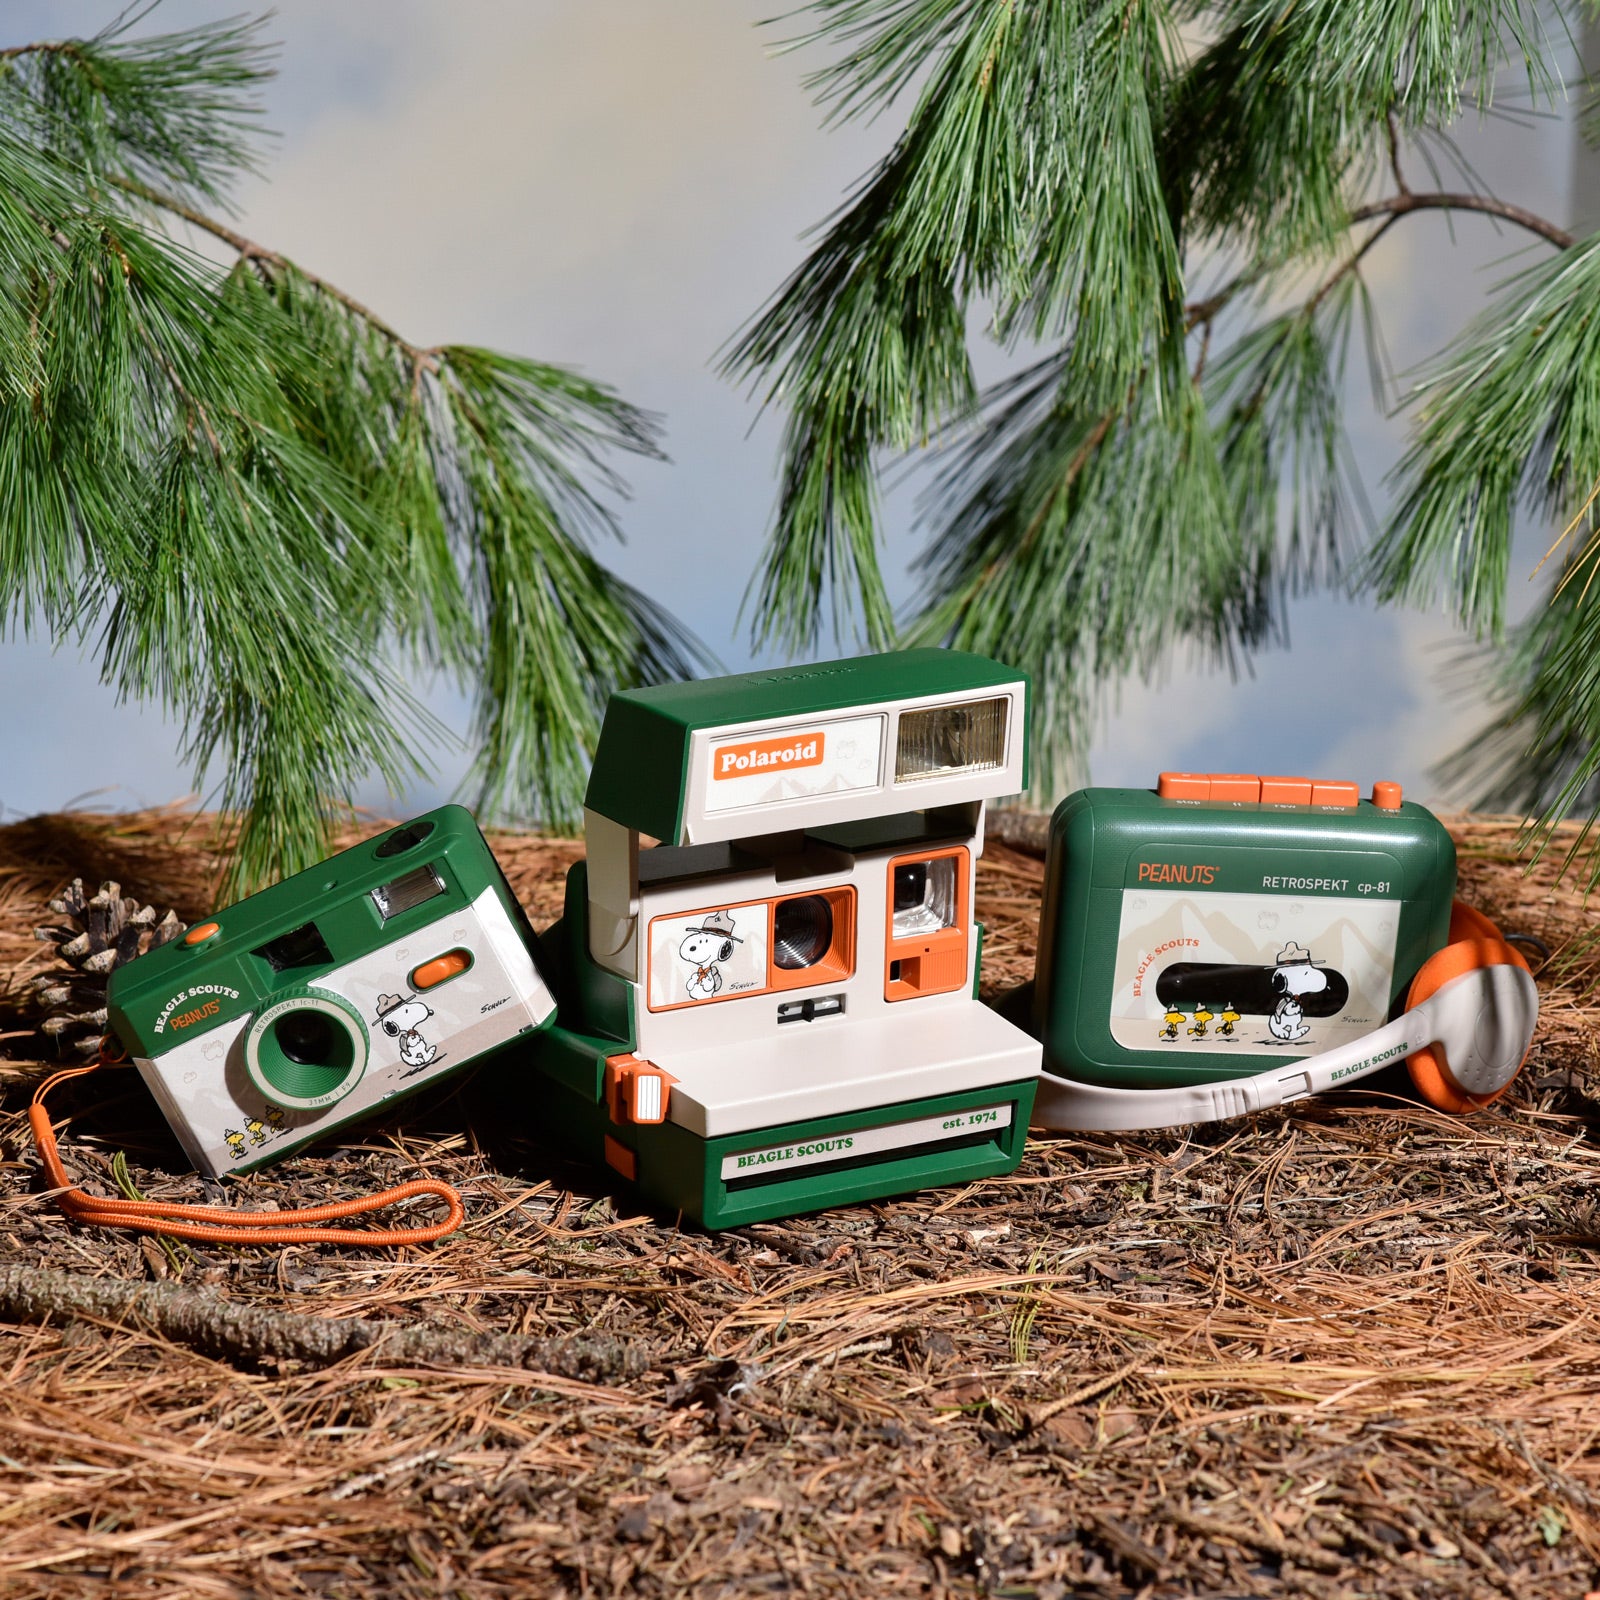 Beagle Scouts Polaroid camera, cassette player and 35 mm camera collection